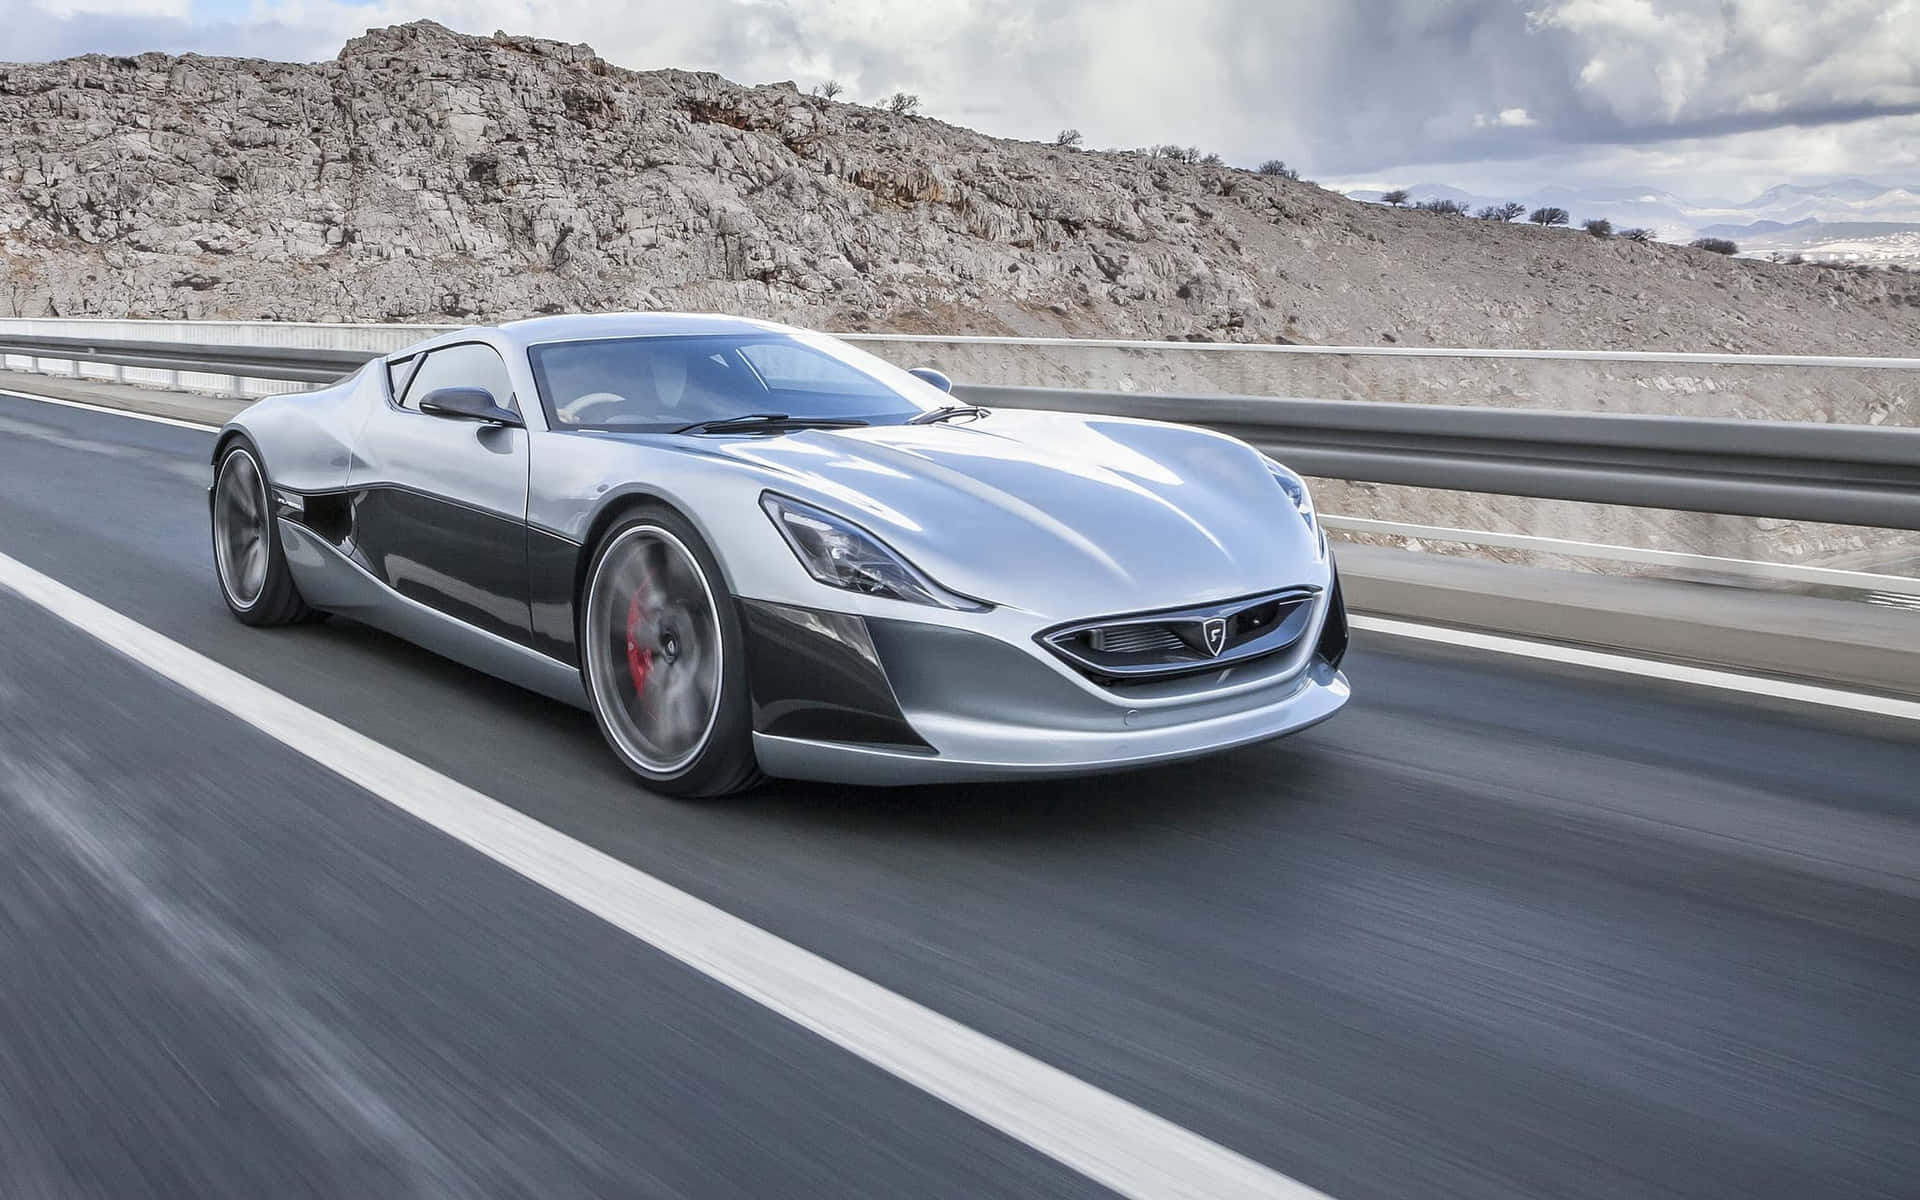 Cutting-edge Rimac Concept One Electric Supercar Against A Stormy Sky Backdrop Wallpaper